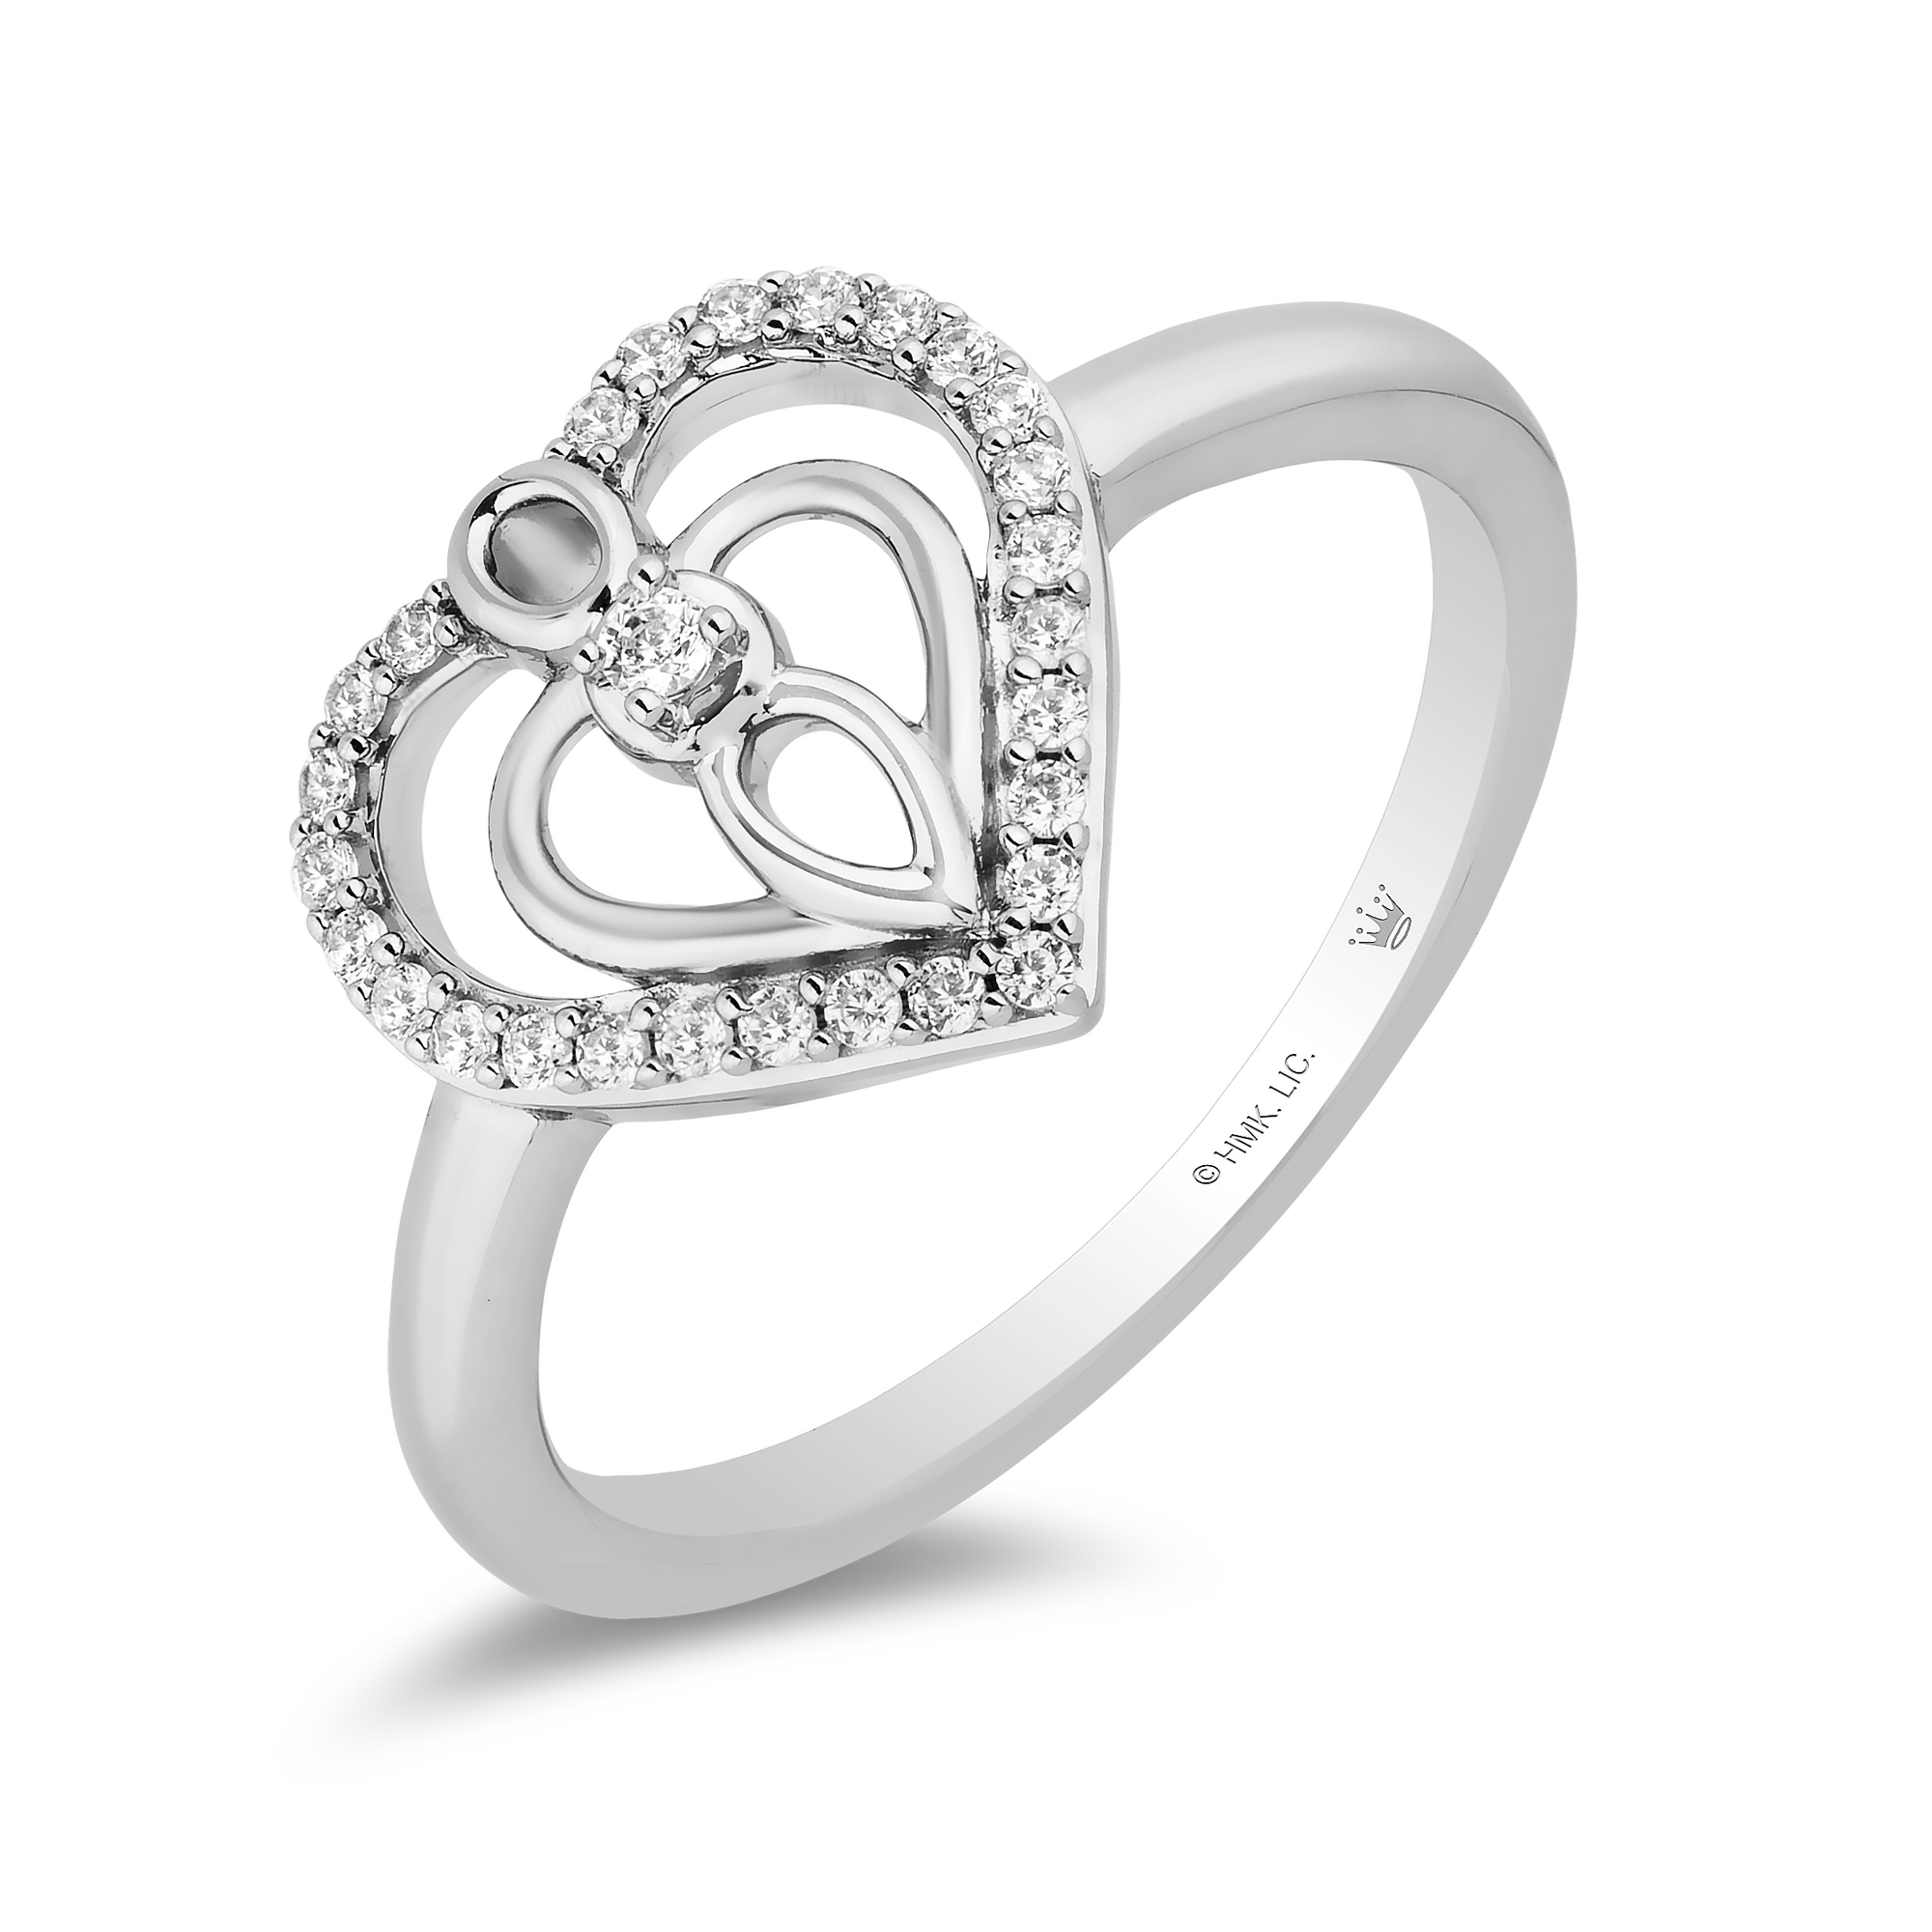 Heart With Inlaid Zircon Stones 925 Sterling Silver Women's Ring (2  Separate Rings In One Design)